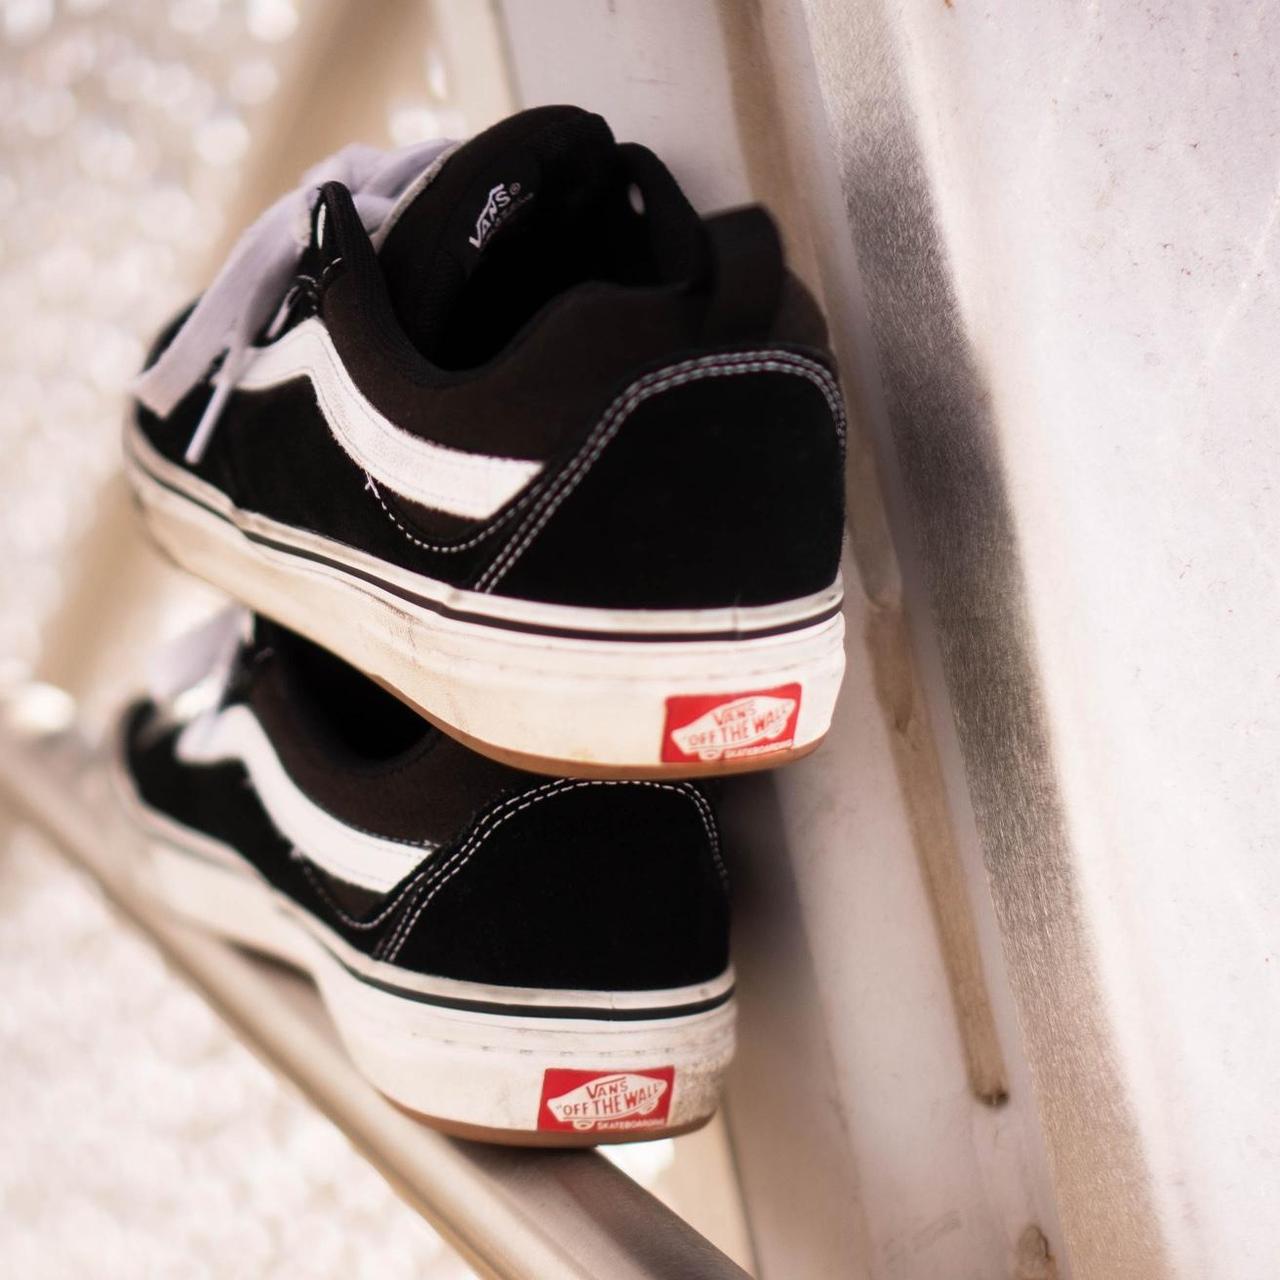 Vans Men's White and Black Trainers (3)